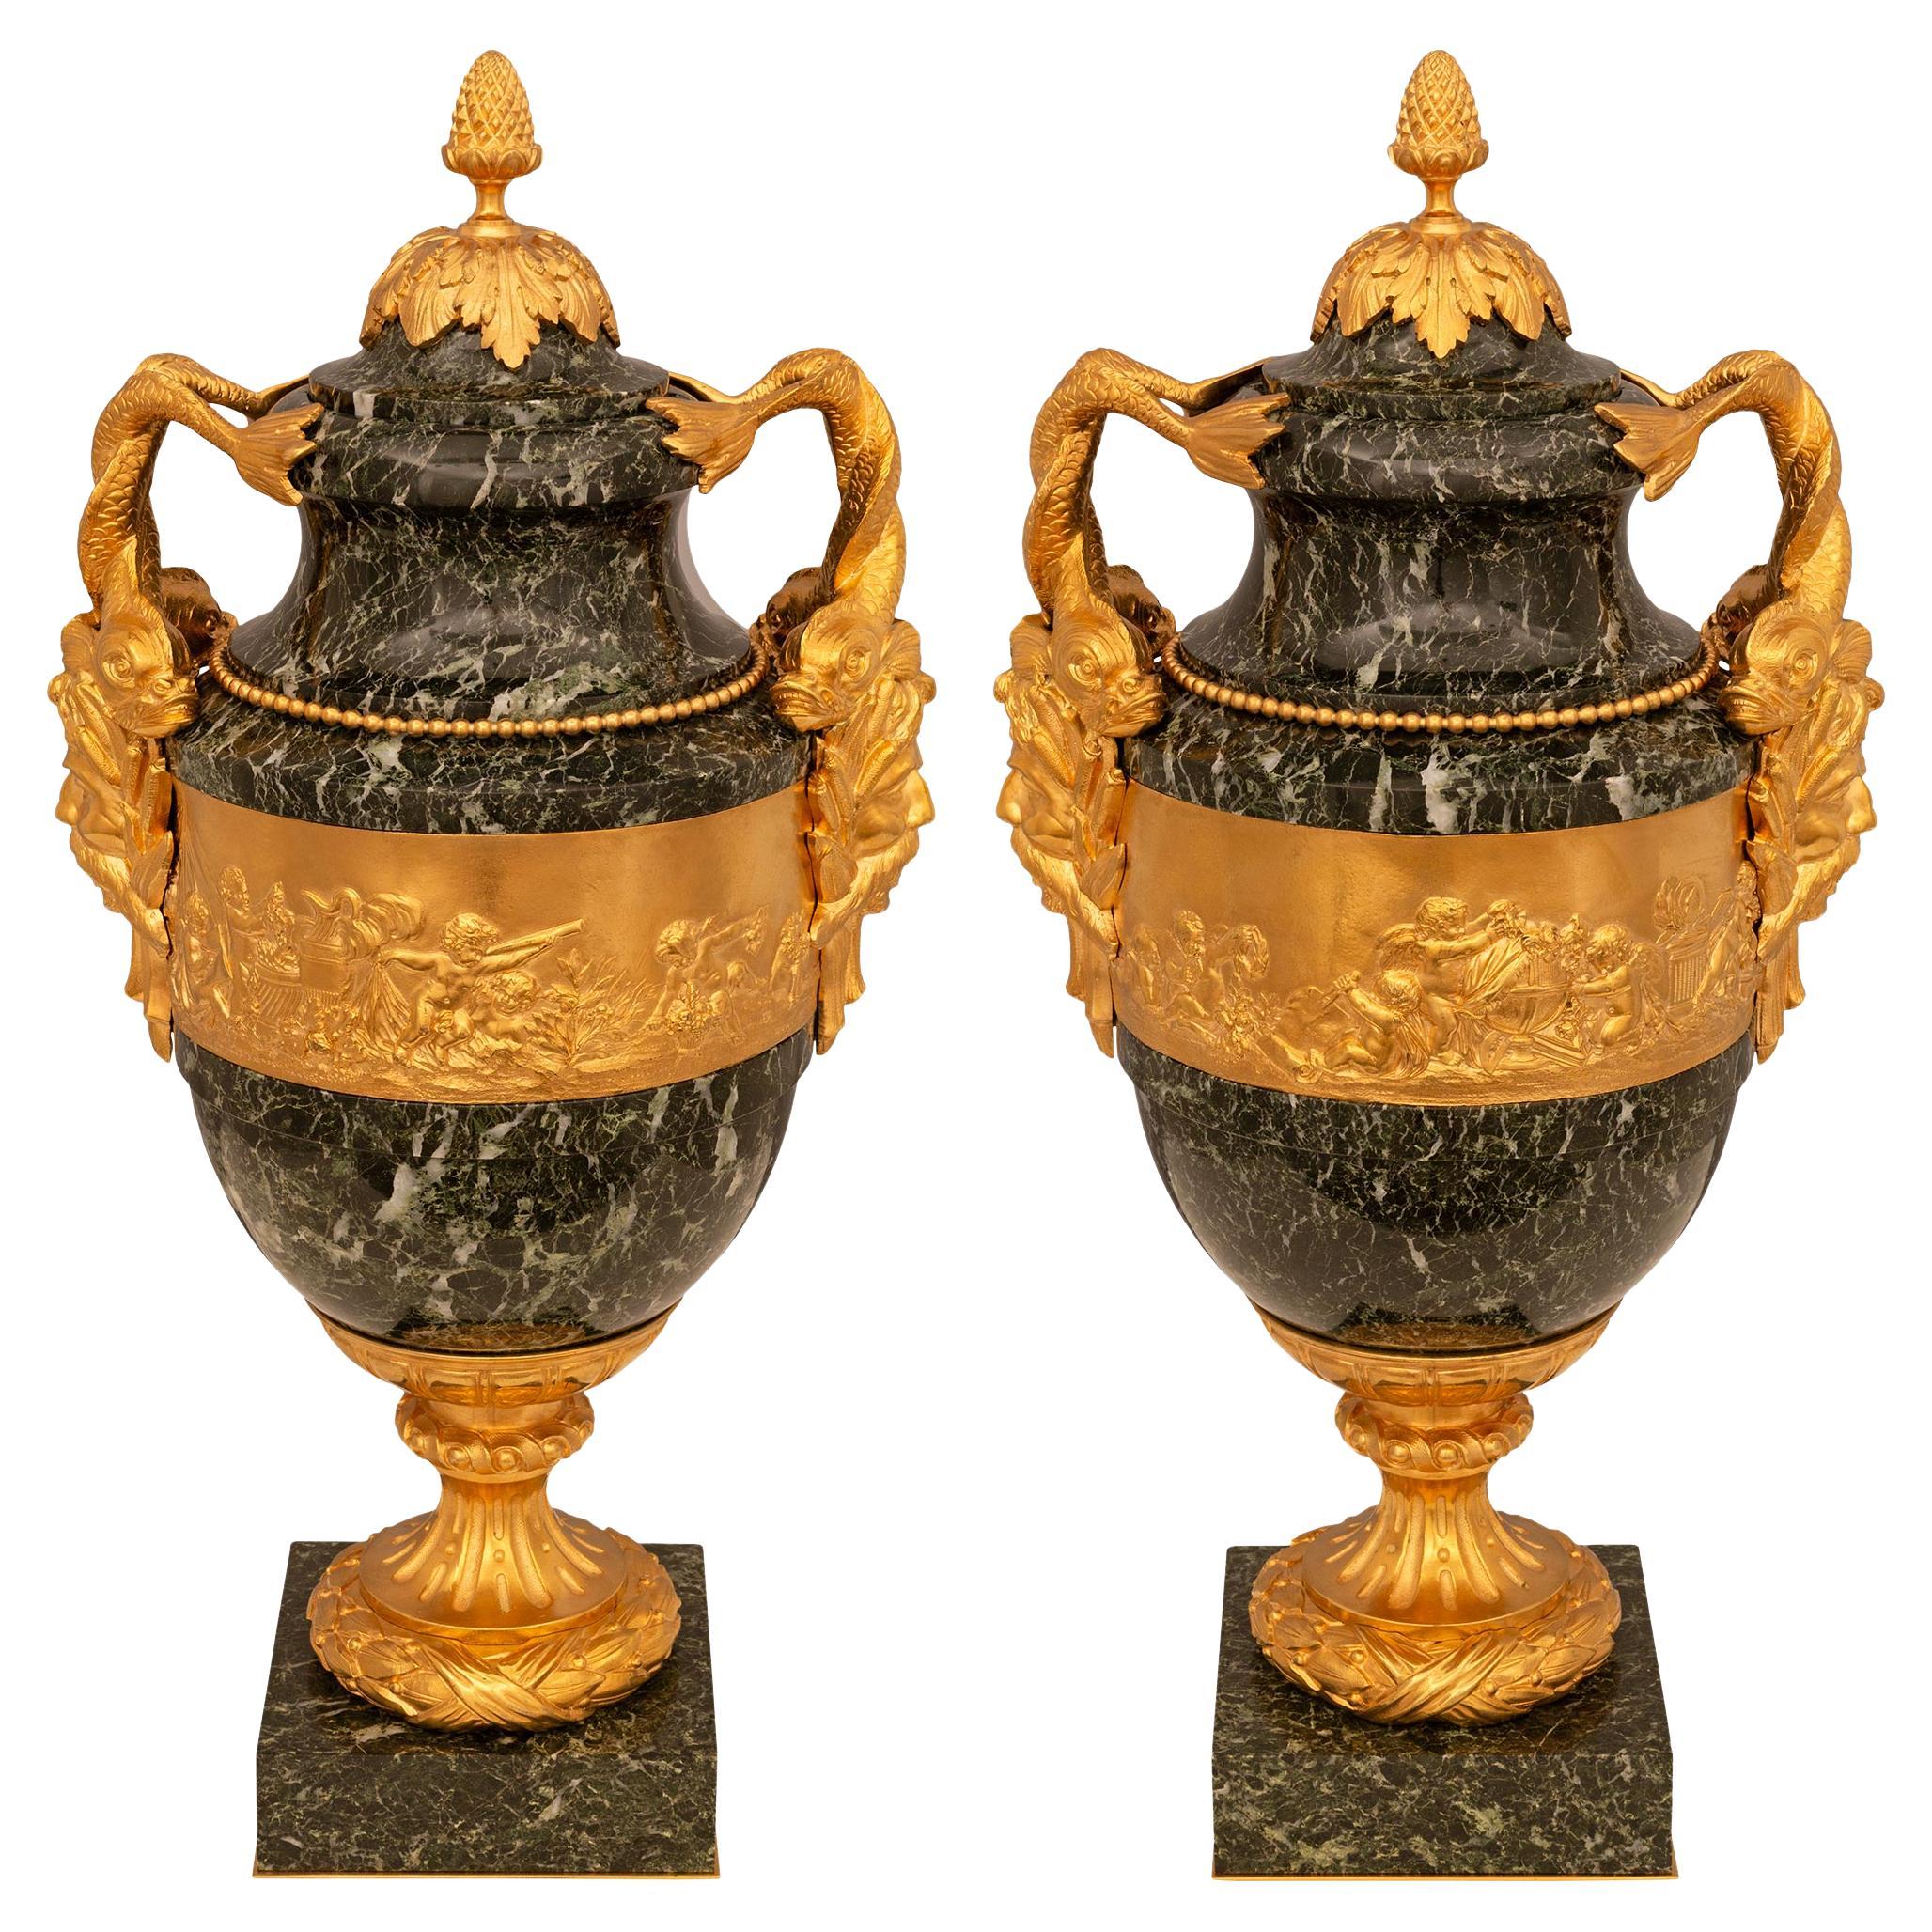 Pair of Stunning French 19th Century Vert Patricia Marble and Ormolu Lidded Urns